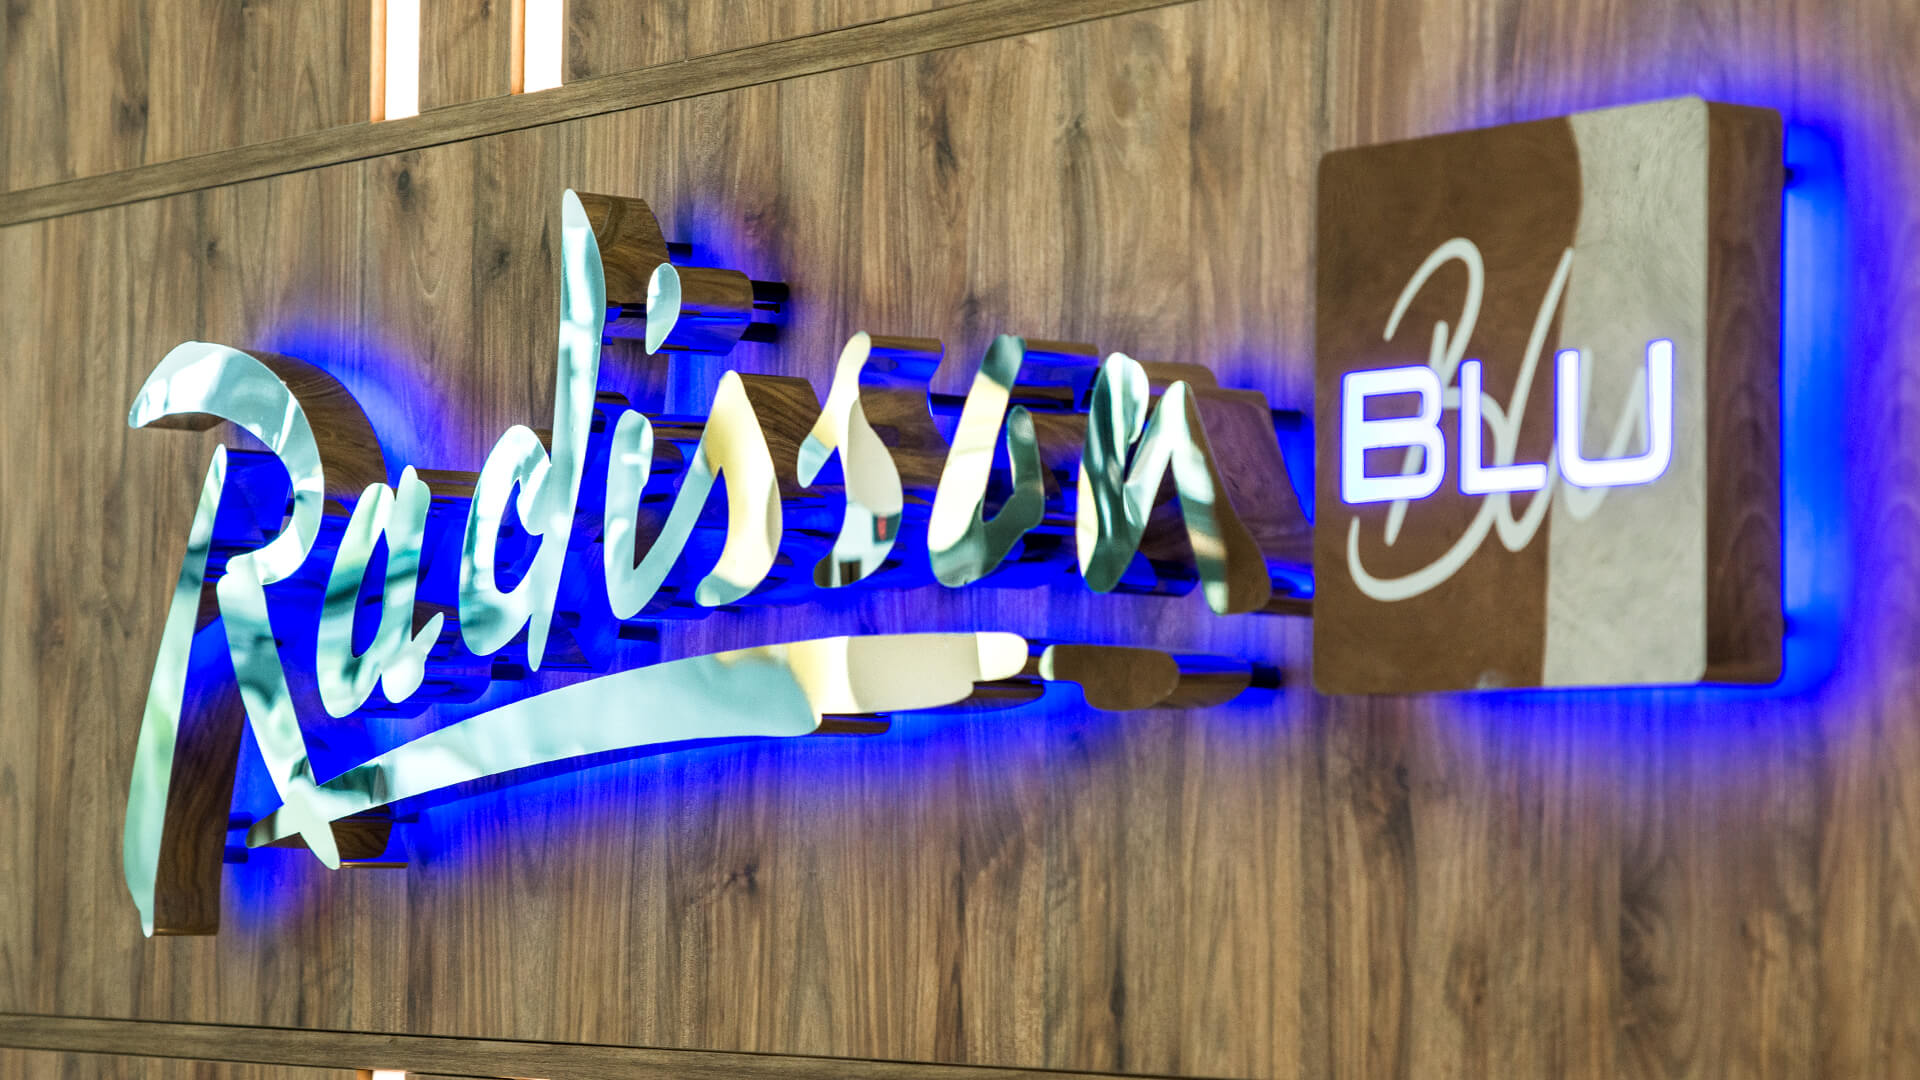 radisson sopot blu hotel - radisson-blu-letters-from-steel-sheet-metal-gold-letters-behind-reception-in-hotel-on-a-wooden-wall-letters-lit-from-back-to-blue-sopot-logo-company-exclusive-glamour